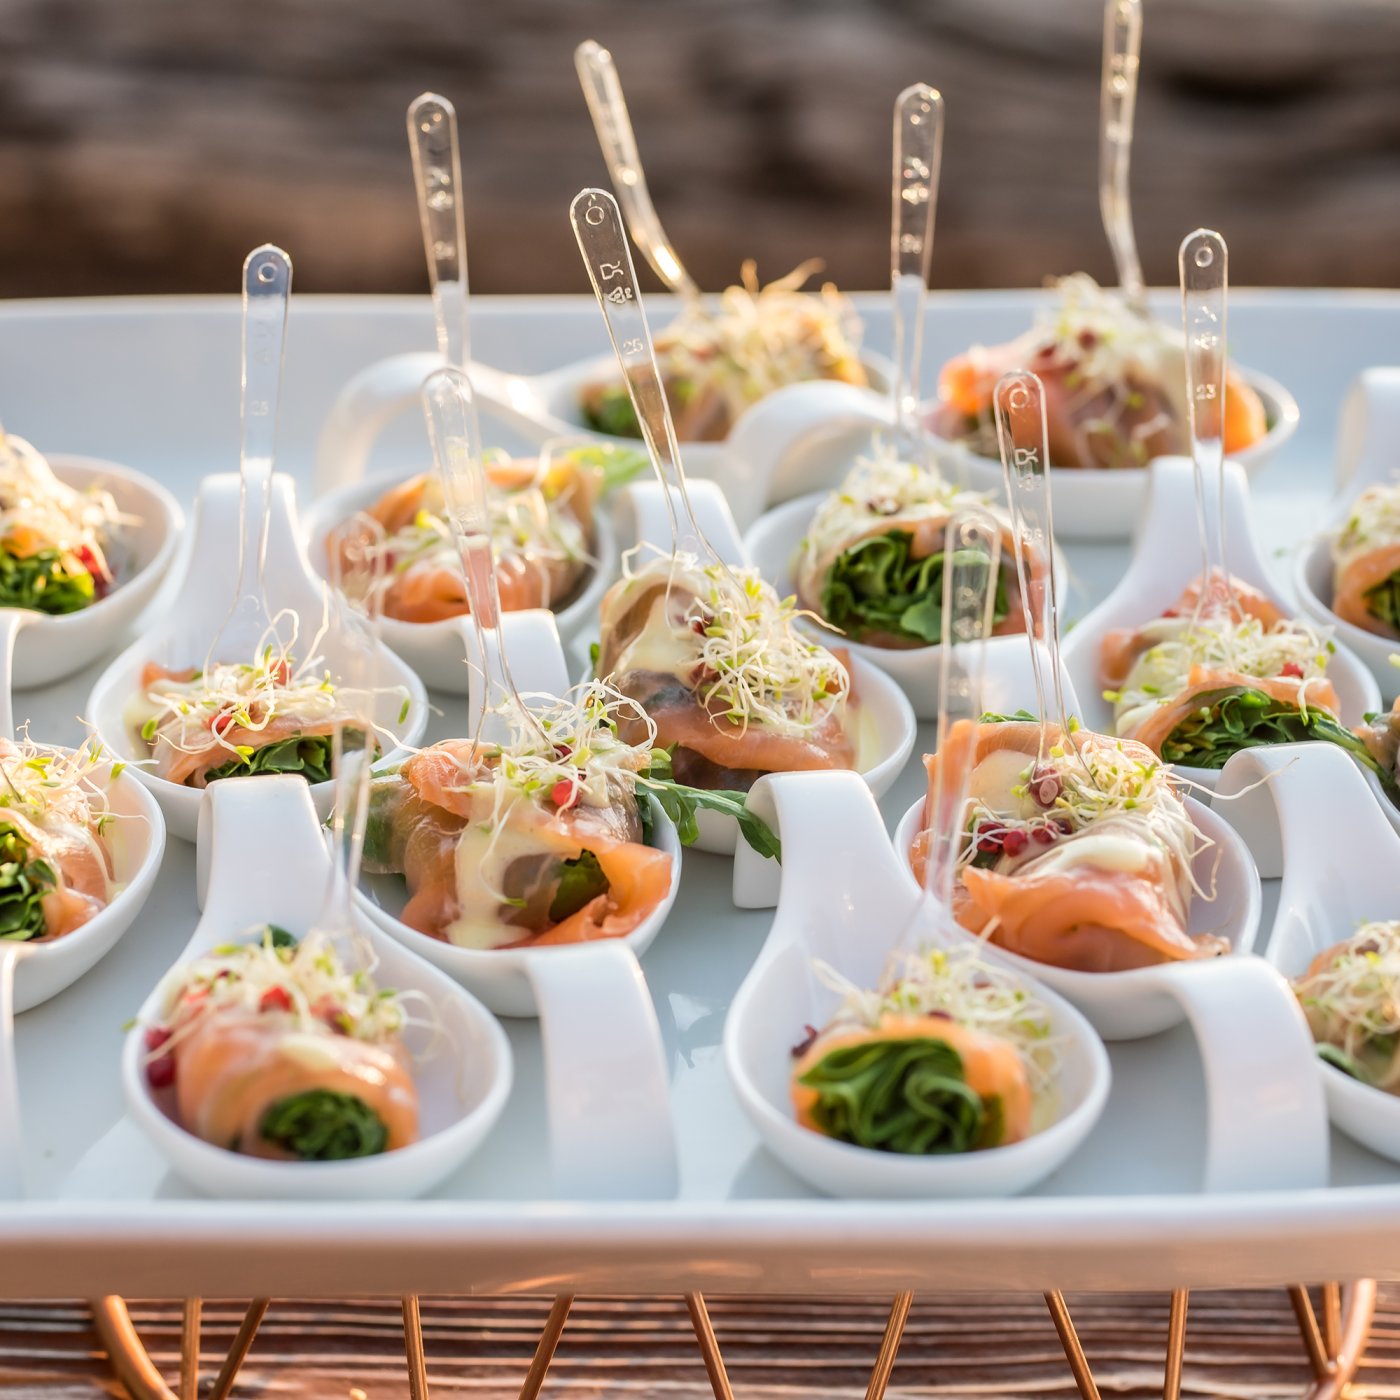 Small saucers carefully positioned on a serving tray containing smoked salmon dressed with salad appertisers